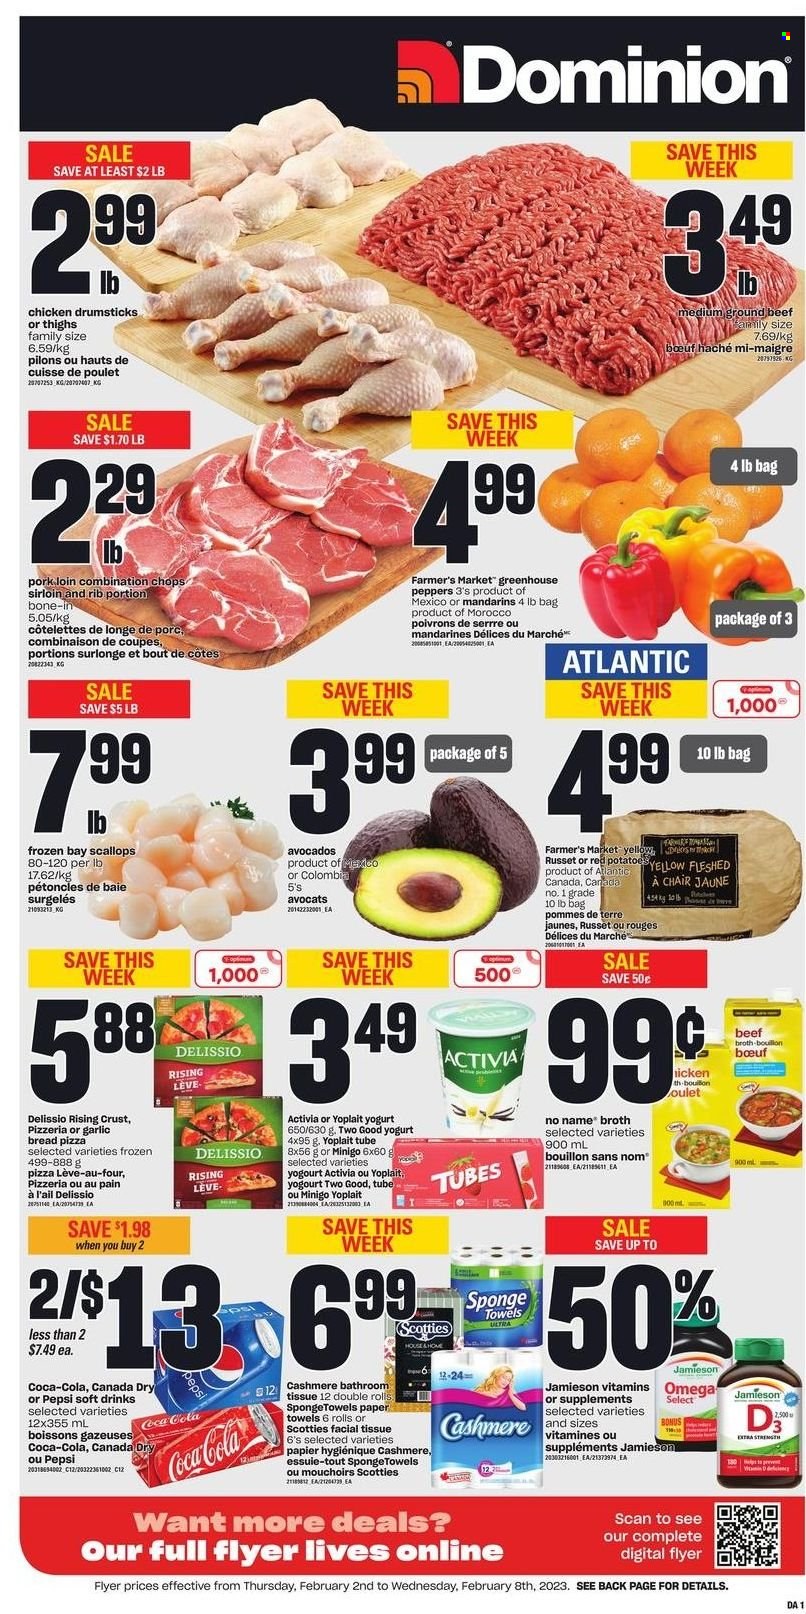 thumbnail - Dominion Flyer - February 02, 2023 - February 08, 2023 - Sales products - chair, bread, russet potatoes, potatoes, peppers, red potatoes, avocado, mandarines, scallops, No Name, pizza, yoghurt, Activia, Yoplait, beef broth, bouillon, broth, Canada Dry, Coca-Cola, Pepsi, soft drink, chicken drumsticks, chicken, beef meat, ground beef, pork loin, pork meat, tissues, kitchen towels, paper towels, sponge, Optimum, WD, greenhouse, vitamin D3. Page 1.